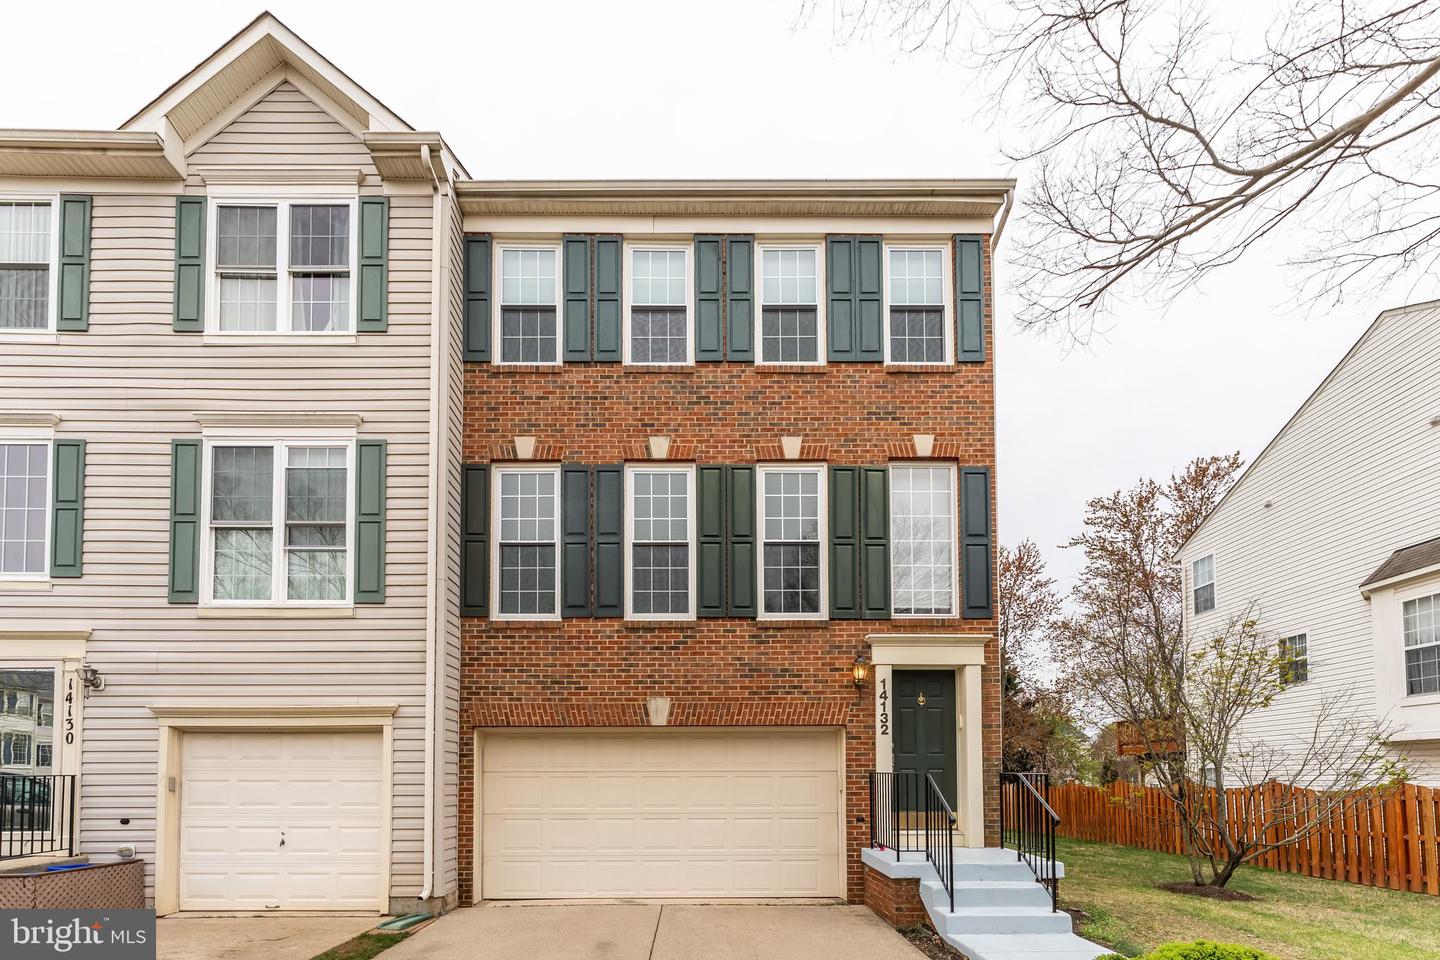 View Boyds, MD 20841 townhome